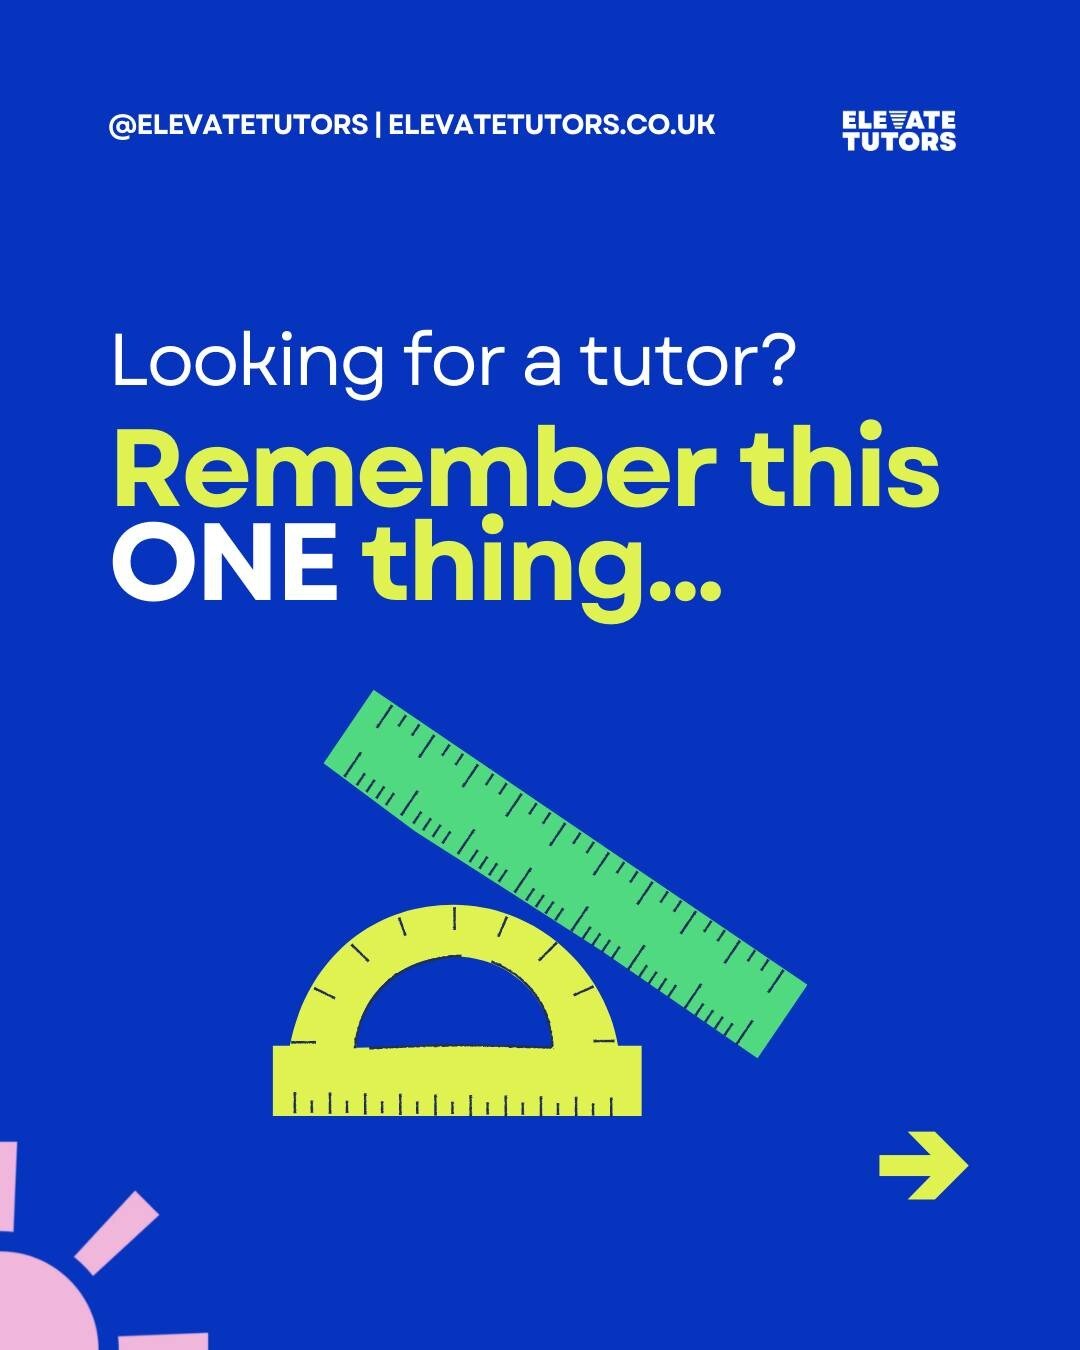 You need to remember this ONE thing when you're looking for a tutor 🙌🏼 &rarr;

__________________________________________________

Need a tutor or a homeschool teacher? Get in touch with us today via our link in bio &uarr;
 ⠀⠀⠀⠀⠀⠀⠀⠀⠀⠀⠀⠀
 ⠀⠀⠀⠀⠀⠀⠀⠀⠀⠀